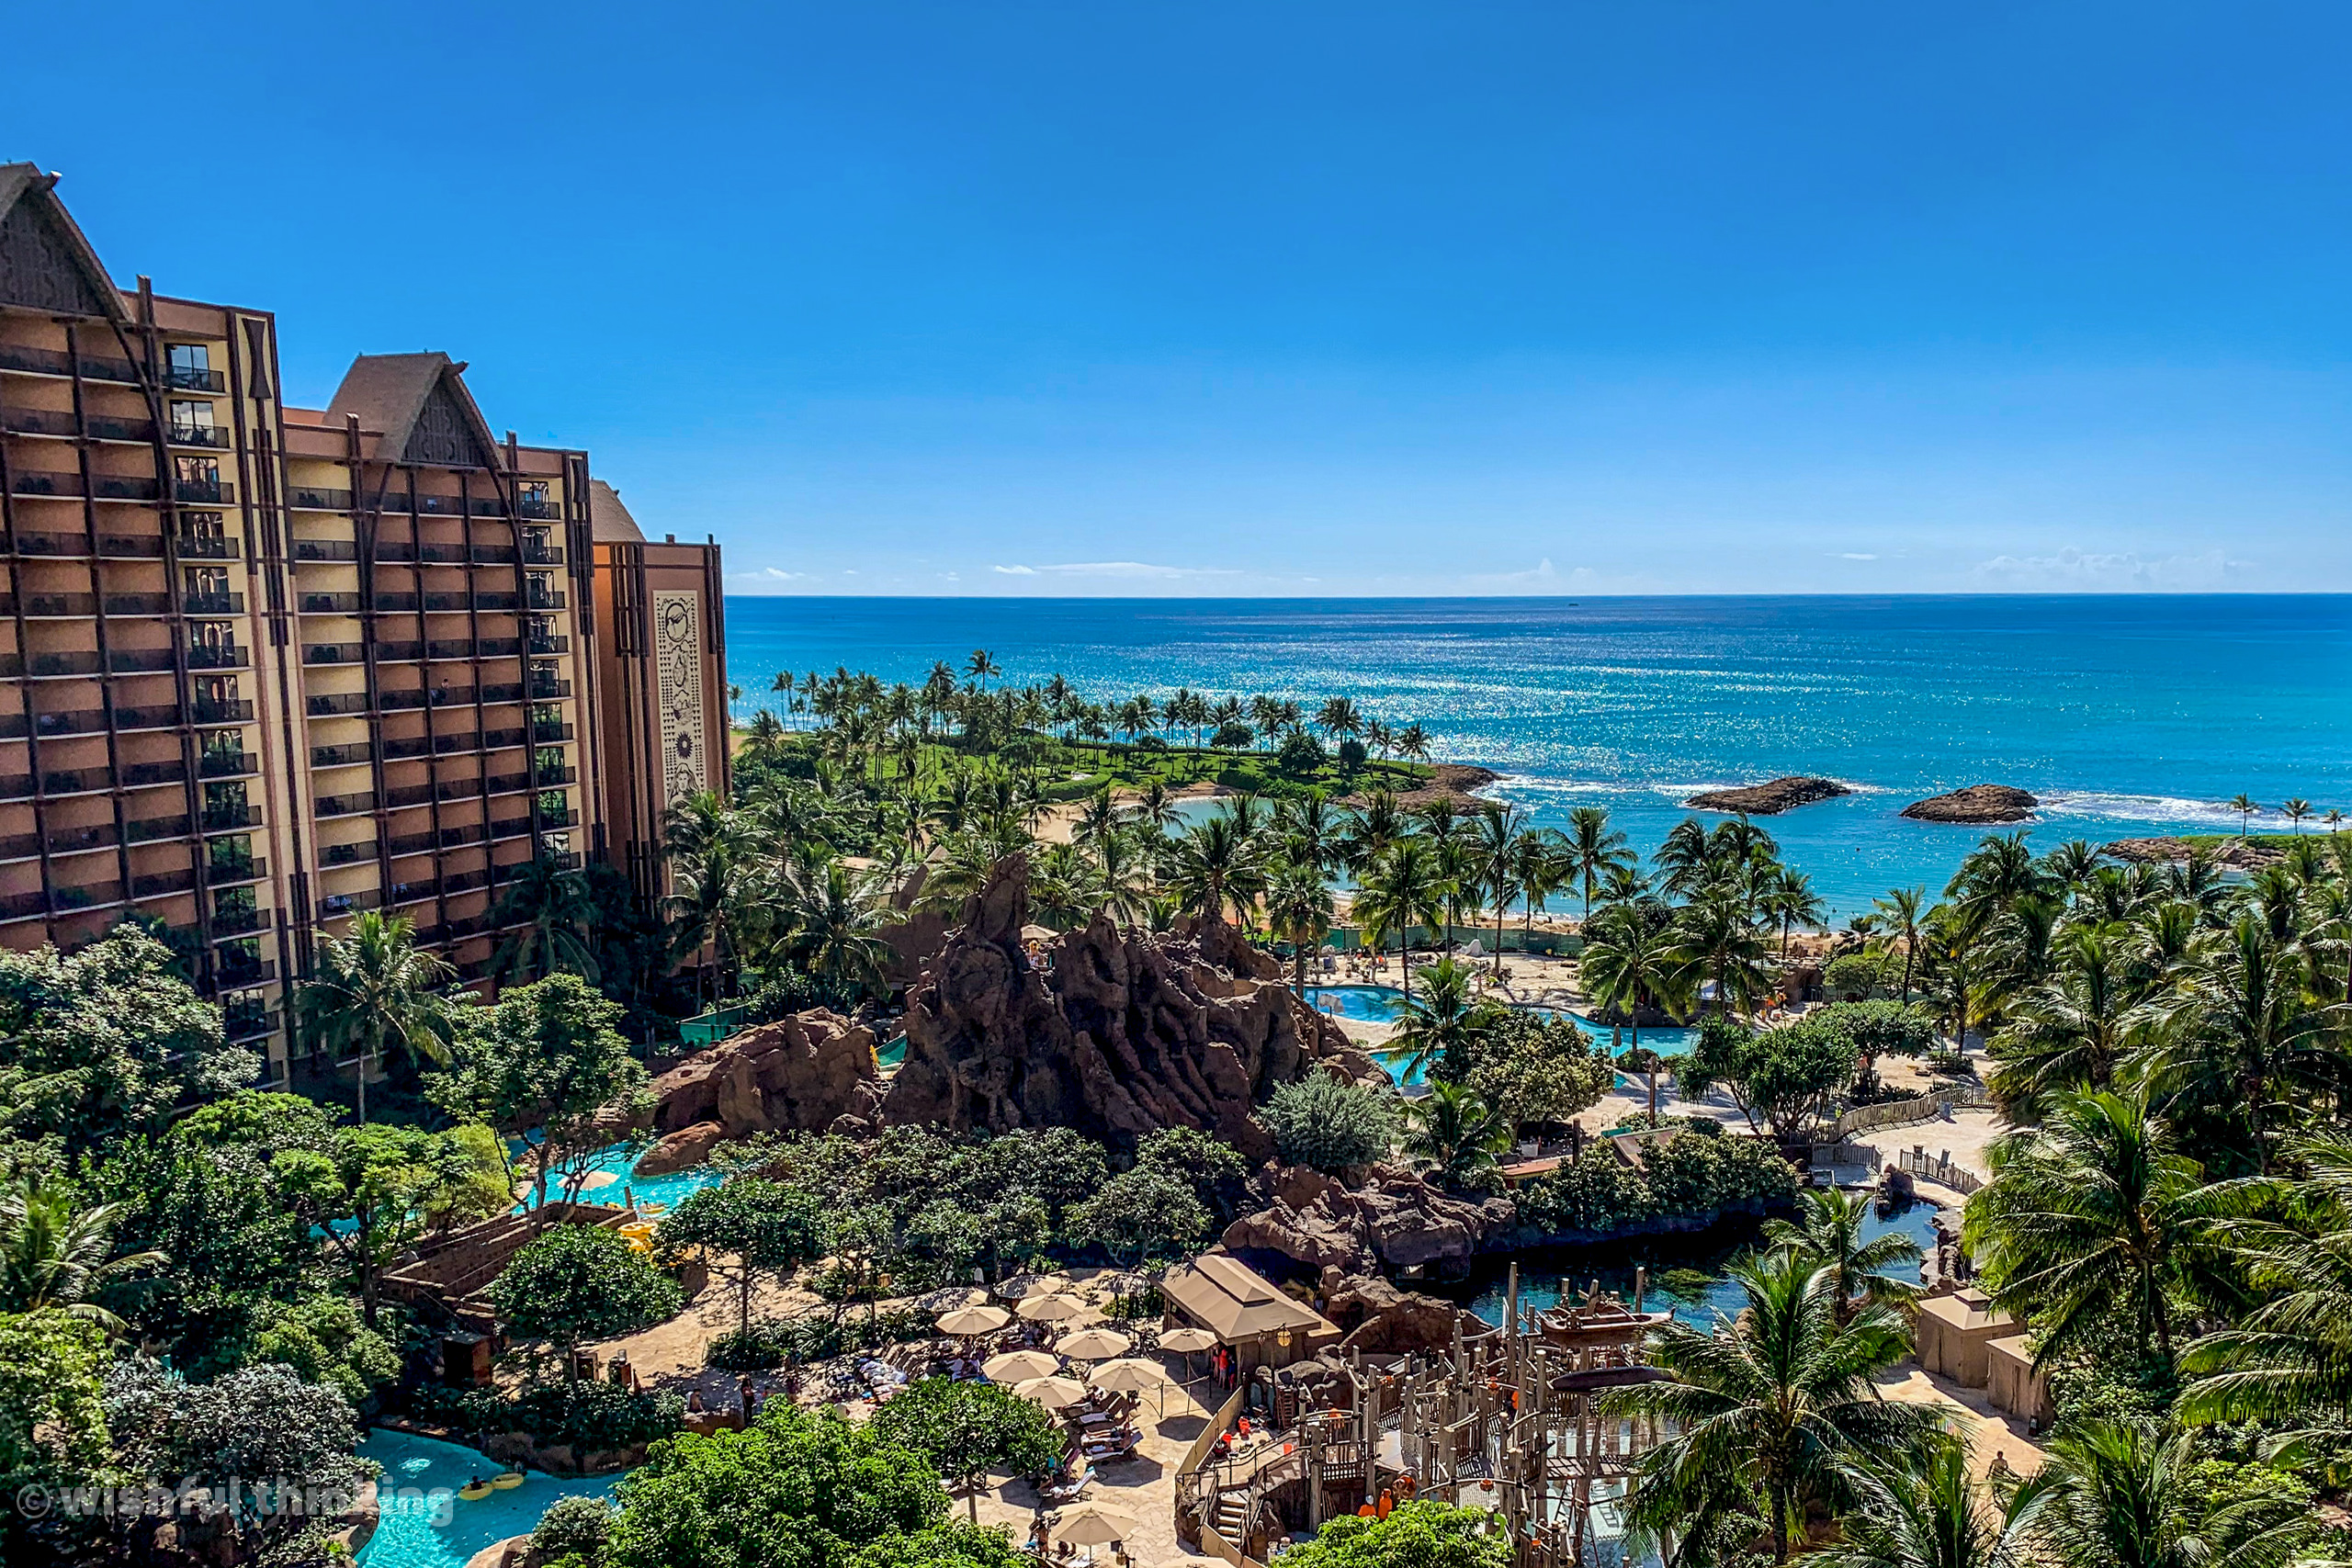 Aulani, a Disney Resort and Spa in Ko Olina, Hawaii beckons guests with spectacular biue oceanviews